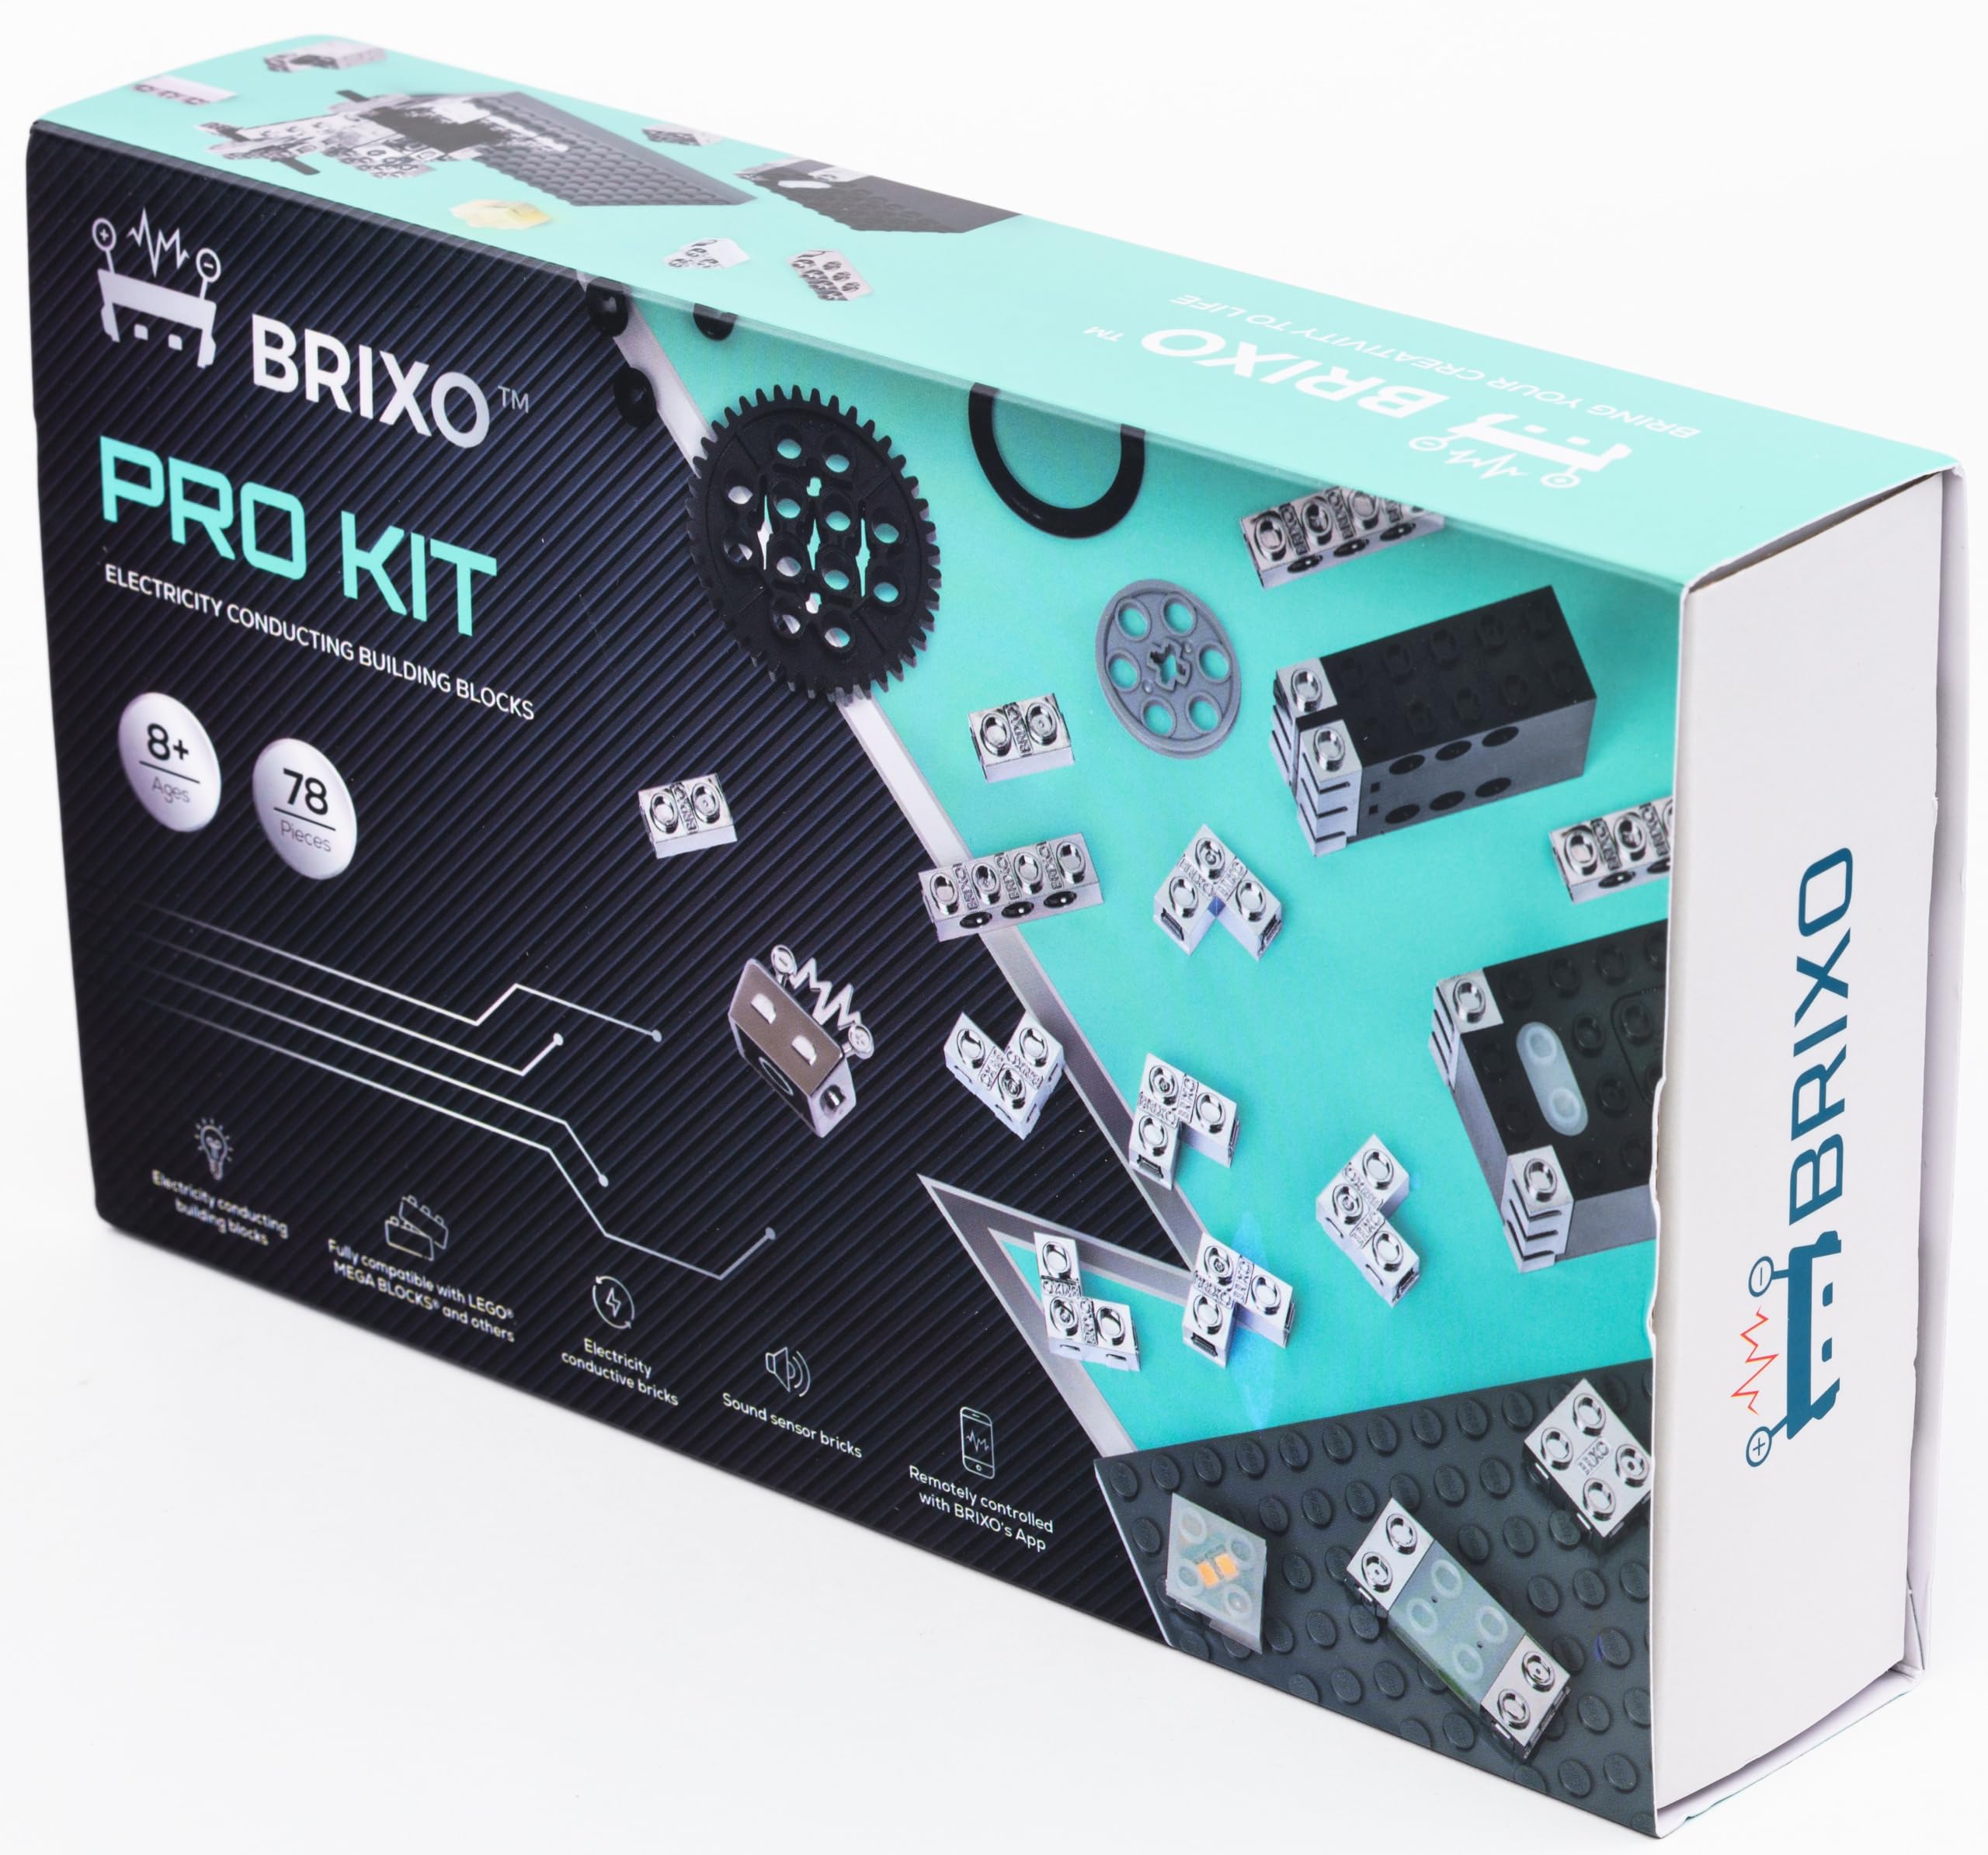 Dakott PRO-KIT, Electricity conducting Building Blocks, Fully Compatible with All LegoBricks and Models. Meet BRIXO - A New World of Creativity and Innovation. Bring Your LegoBricks to Life.